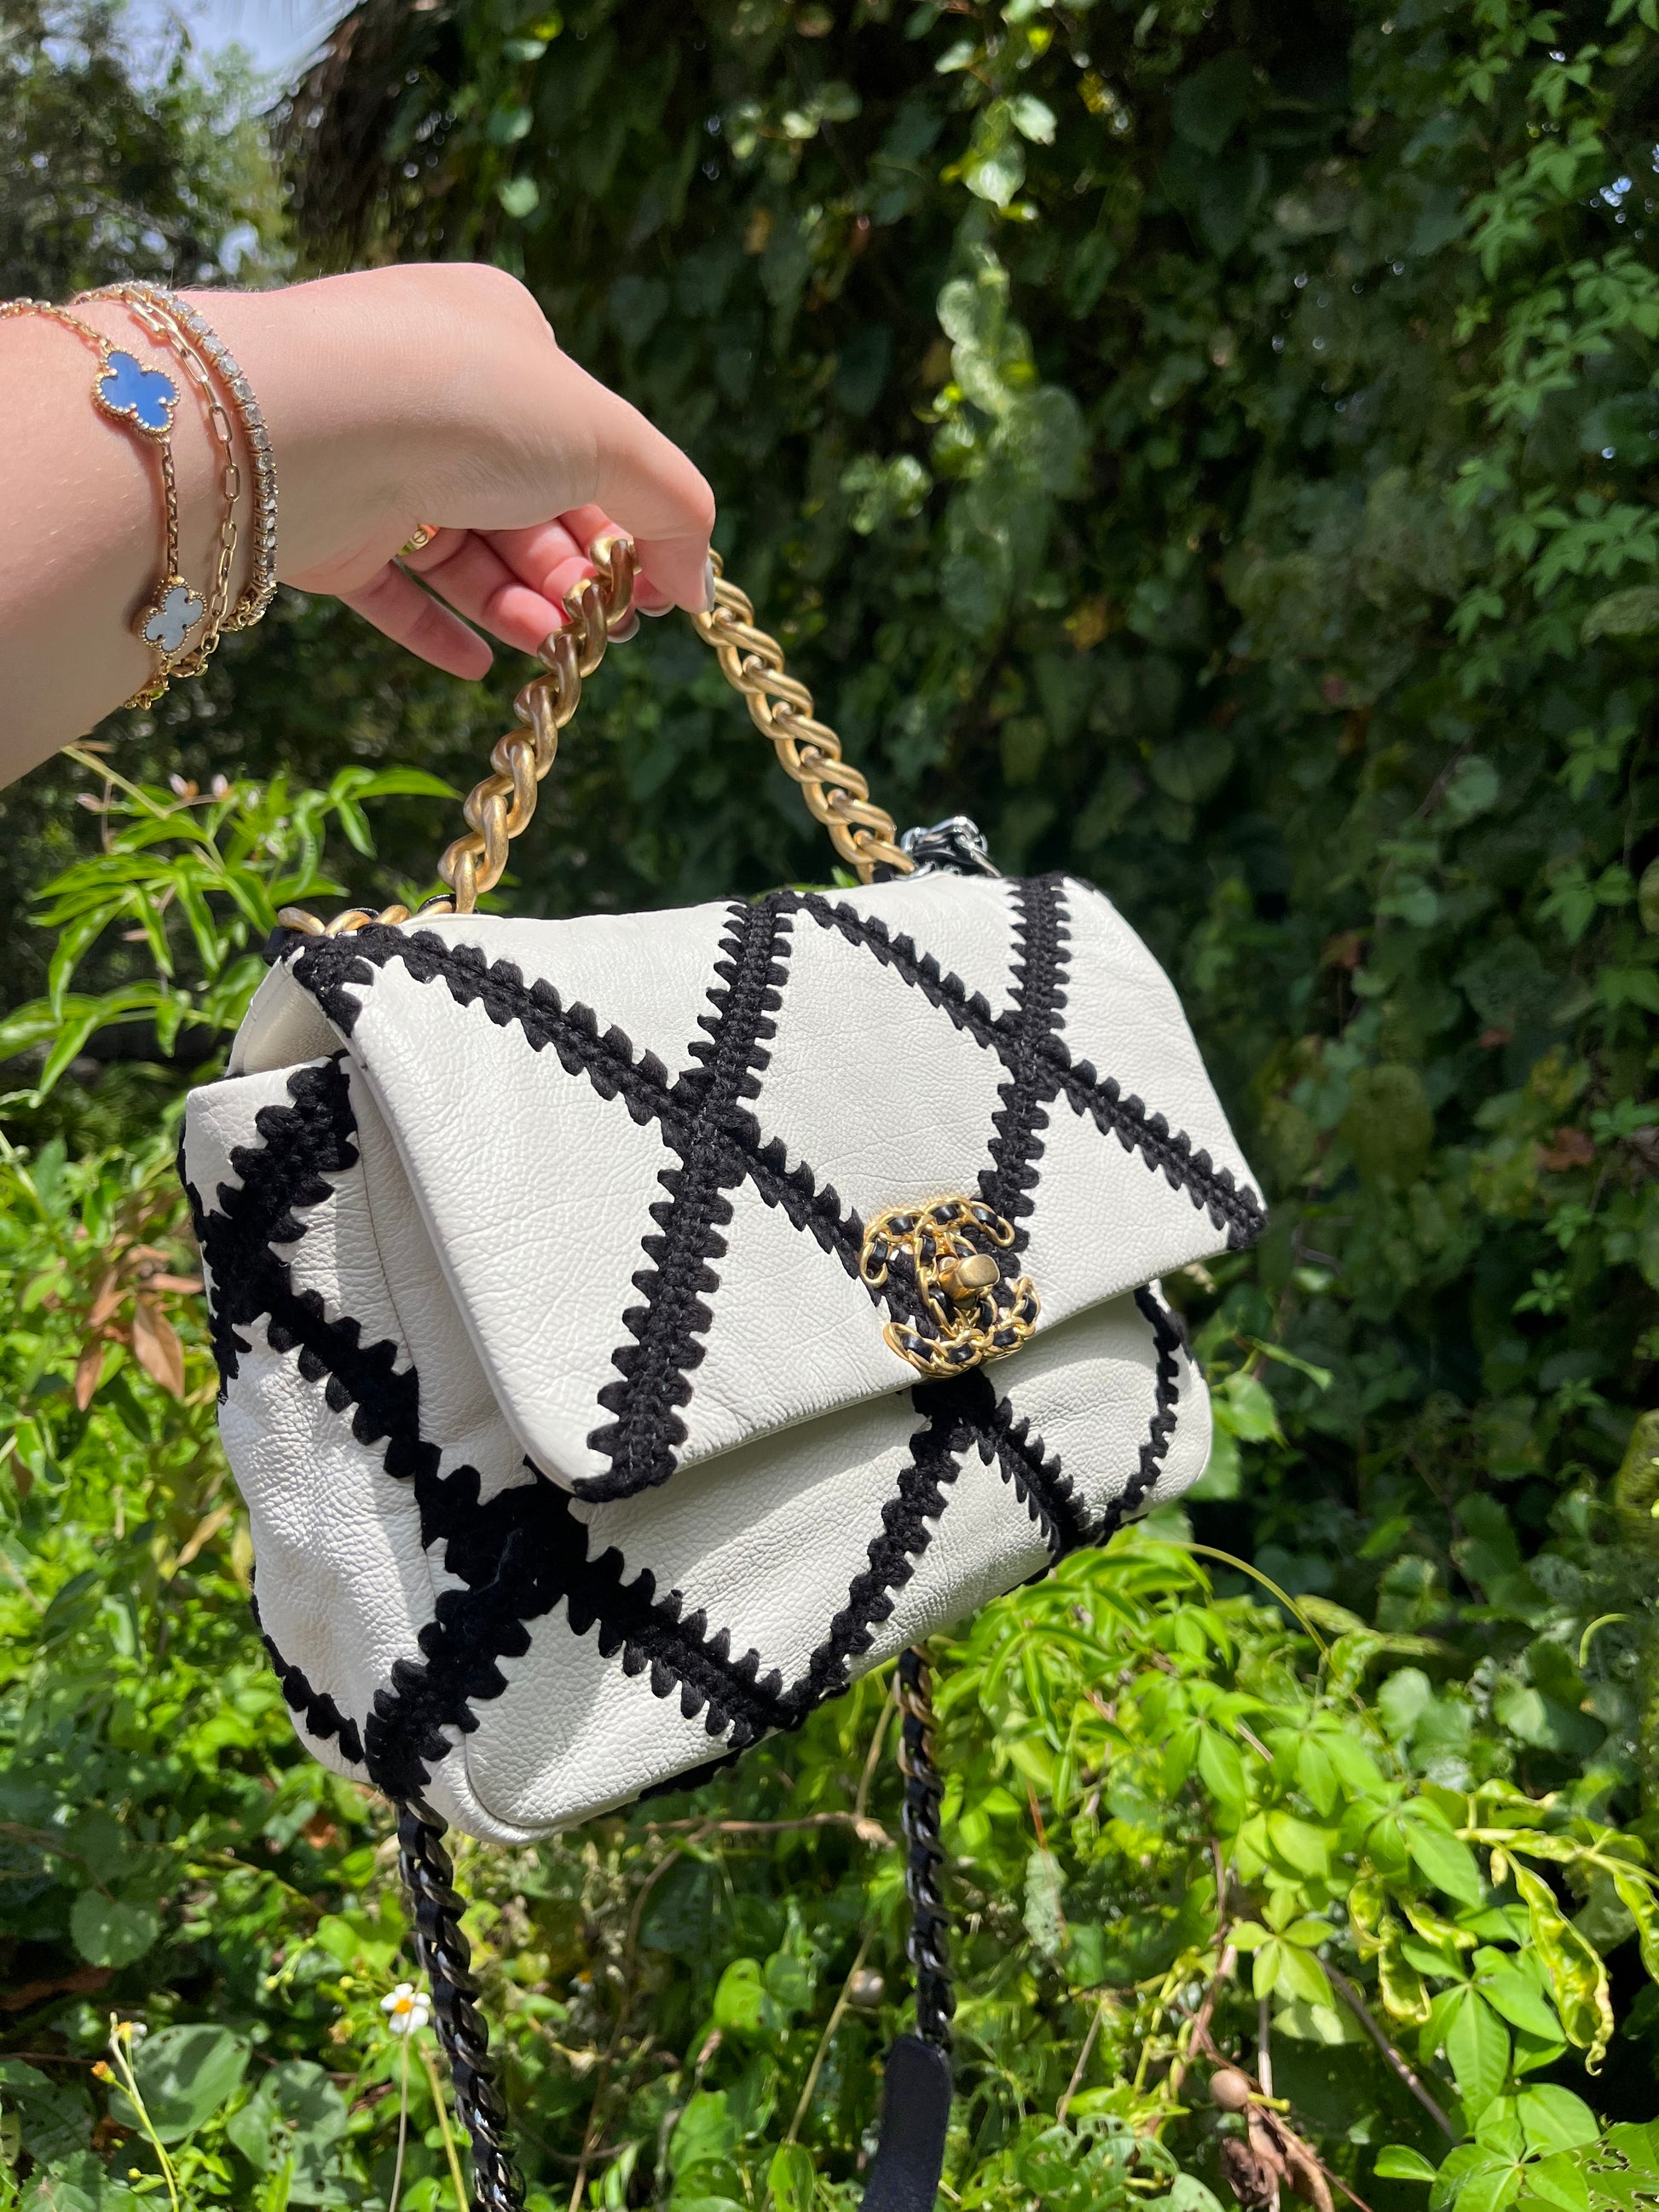 black and white chanel 19 bag